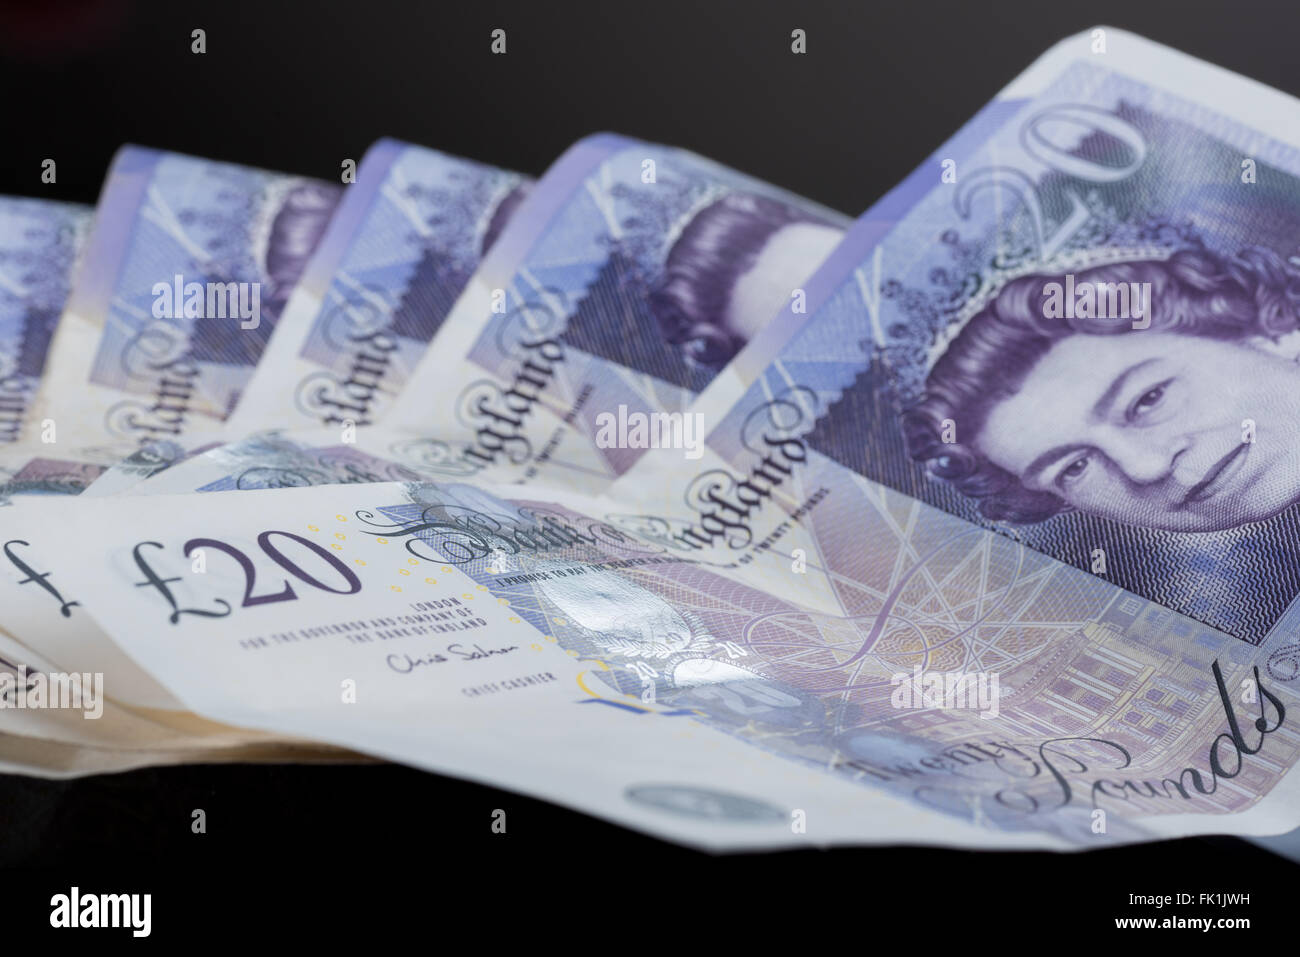 A pile of 20 pound notes Stock Photo